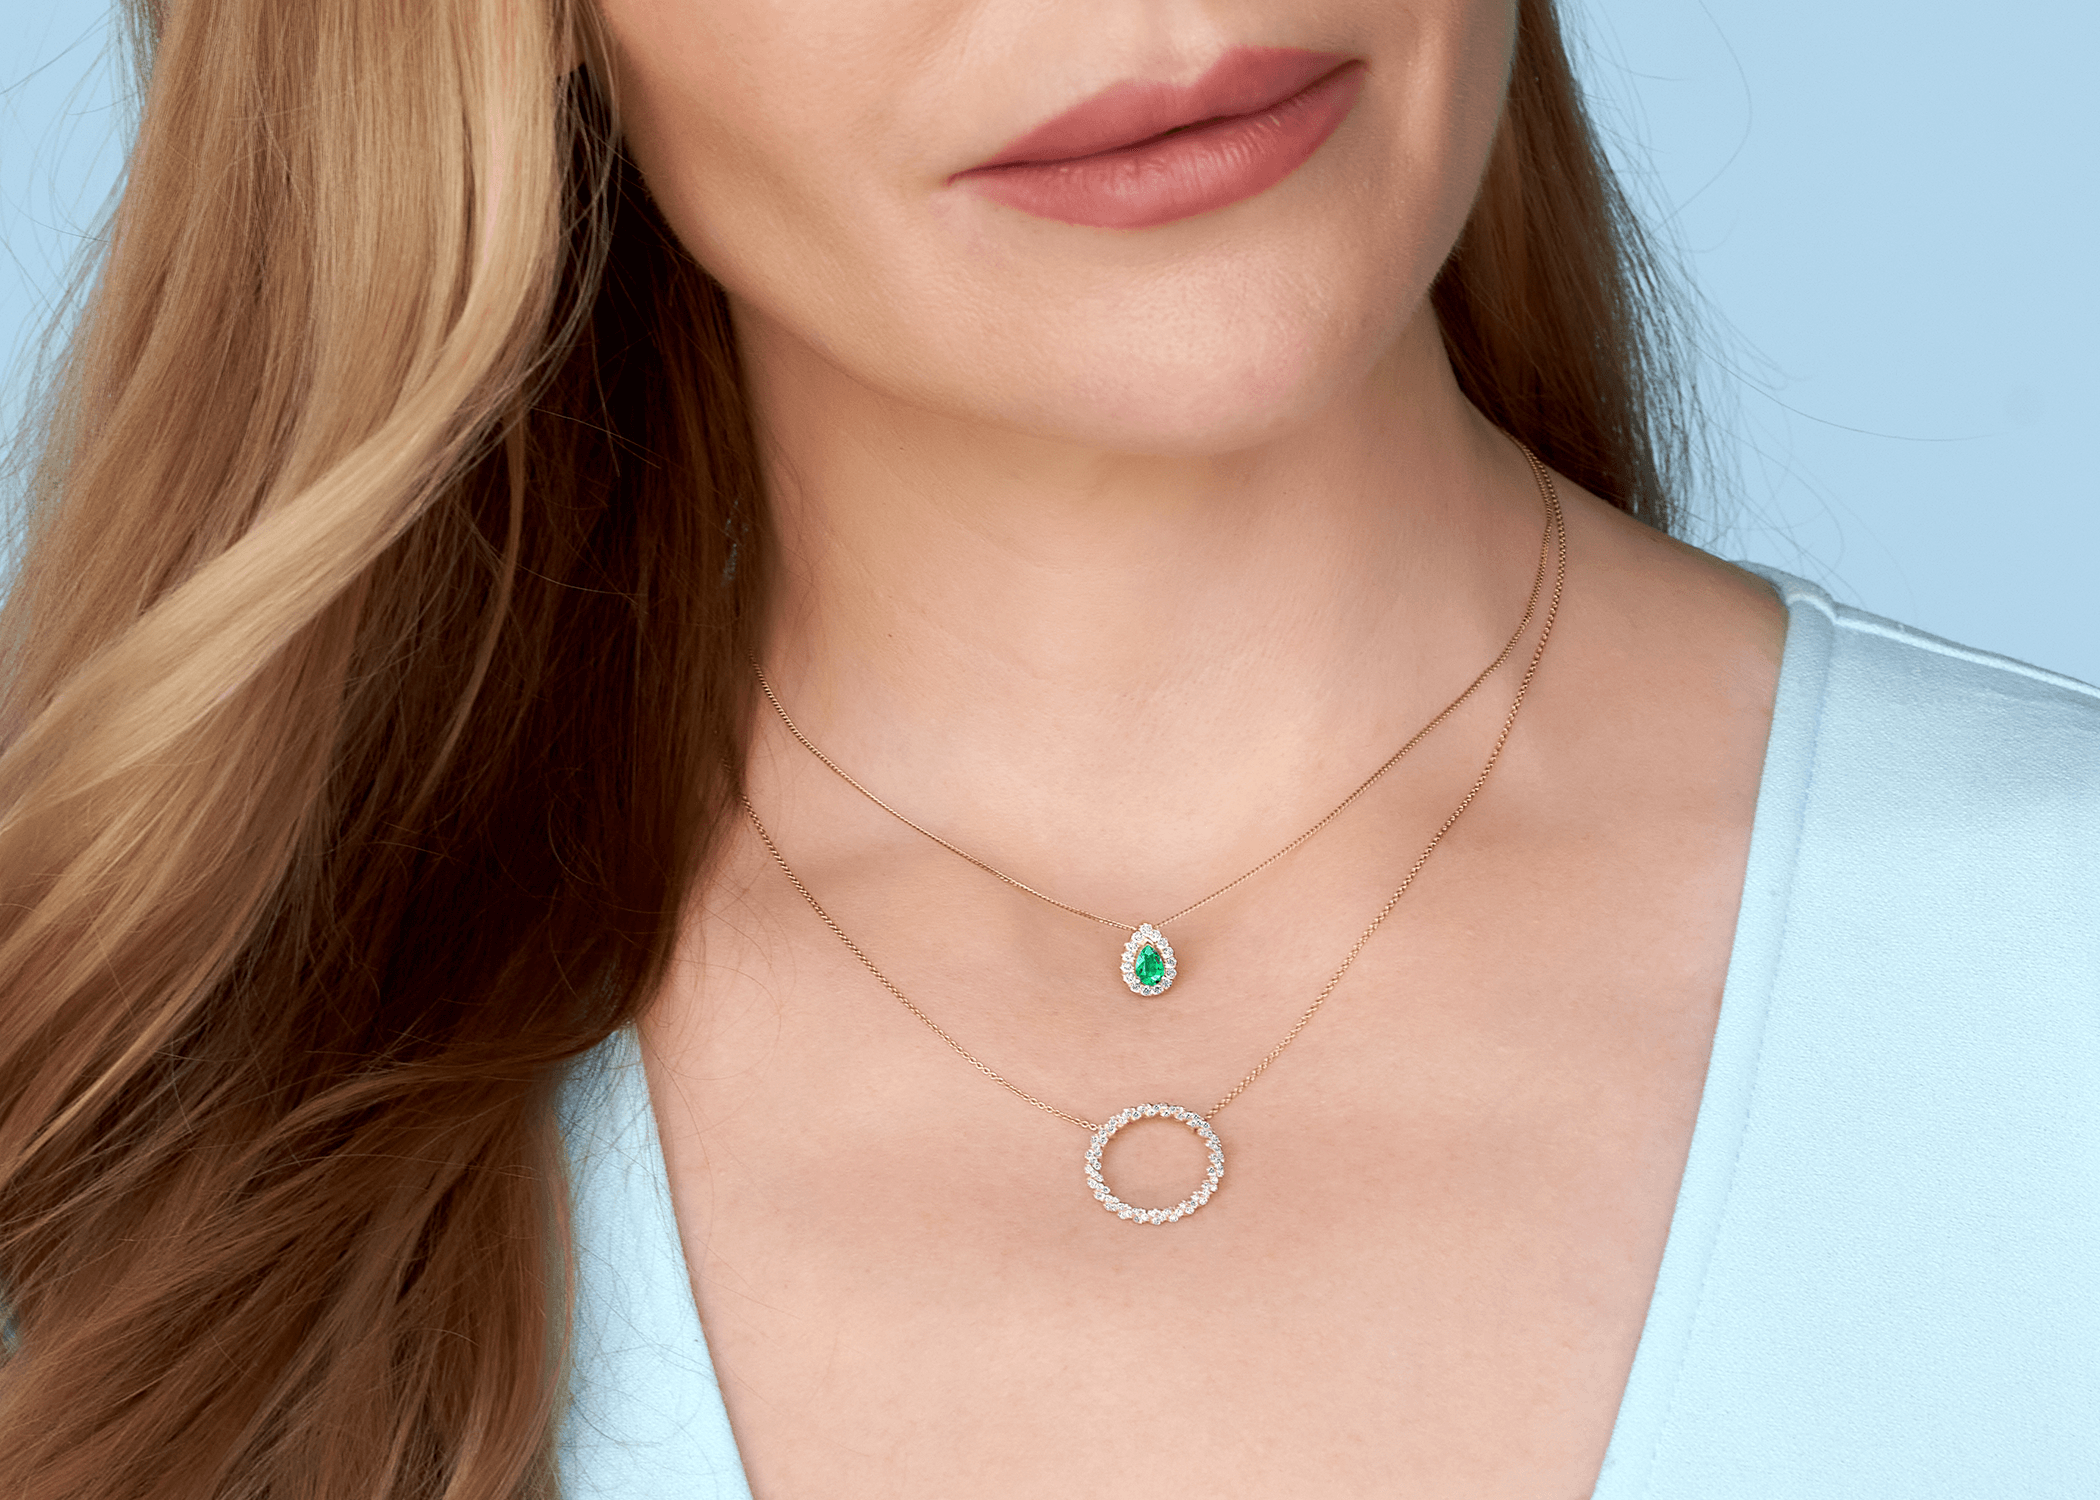 Intertwined Circular Silhouette Necklace - Necklace 